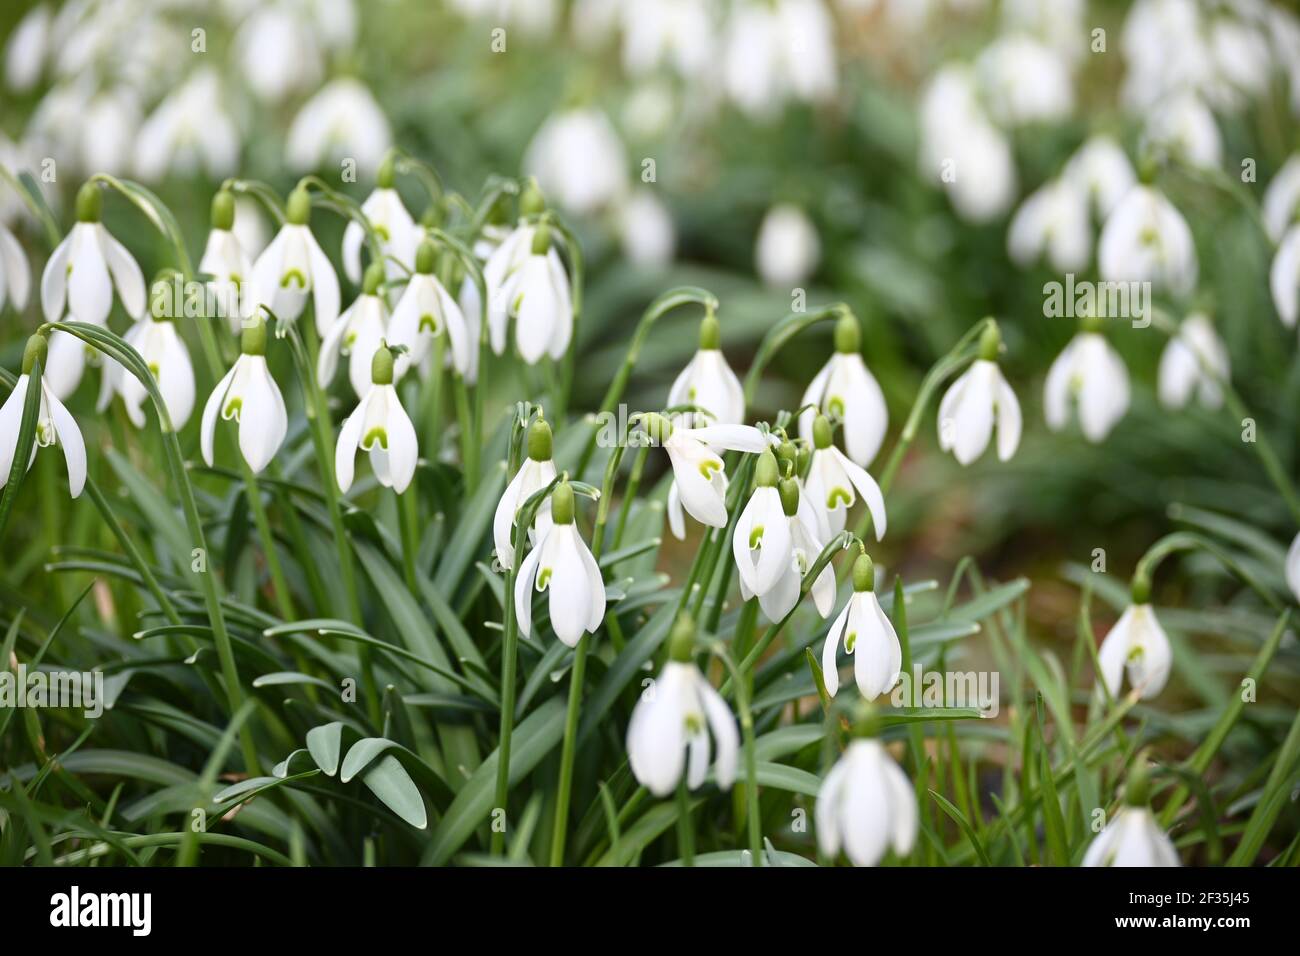 A pile of snowdrops Stock Photo